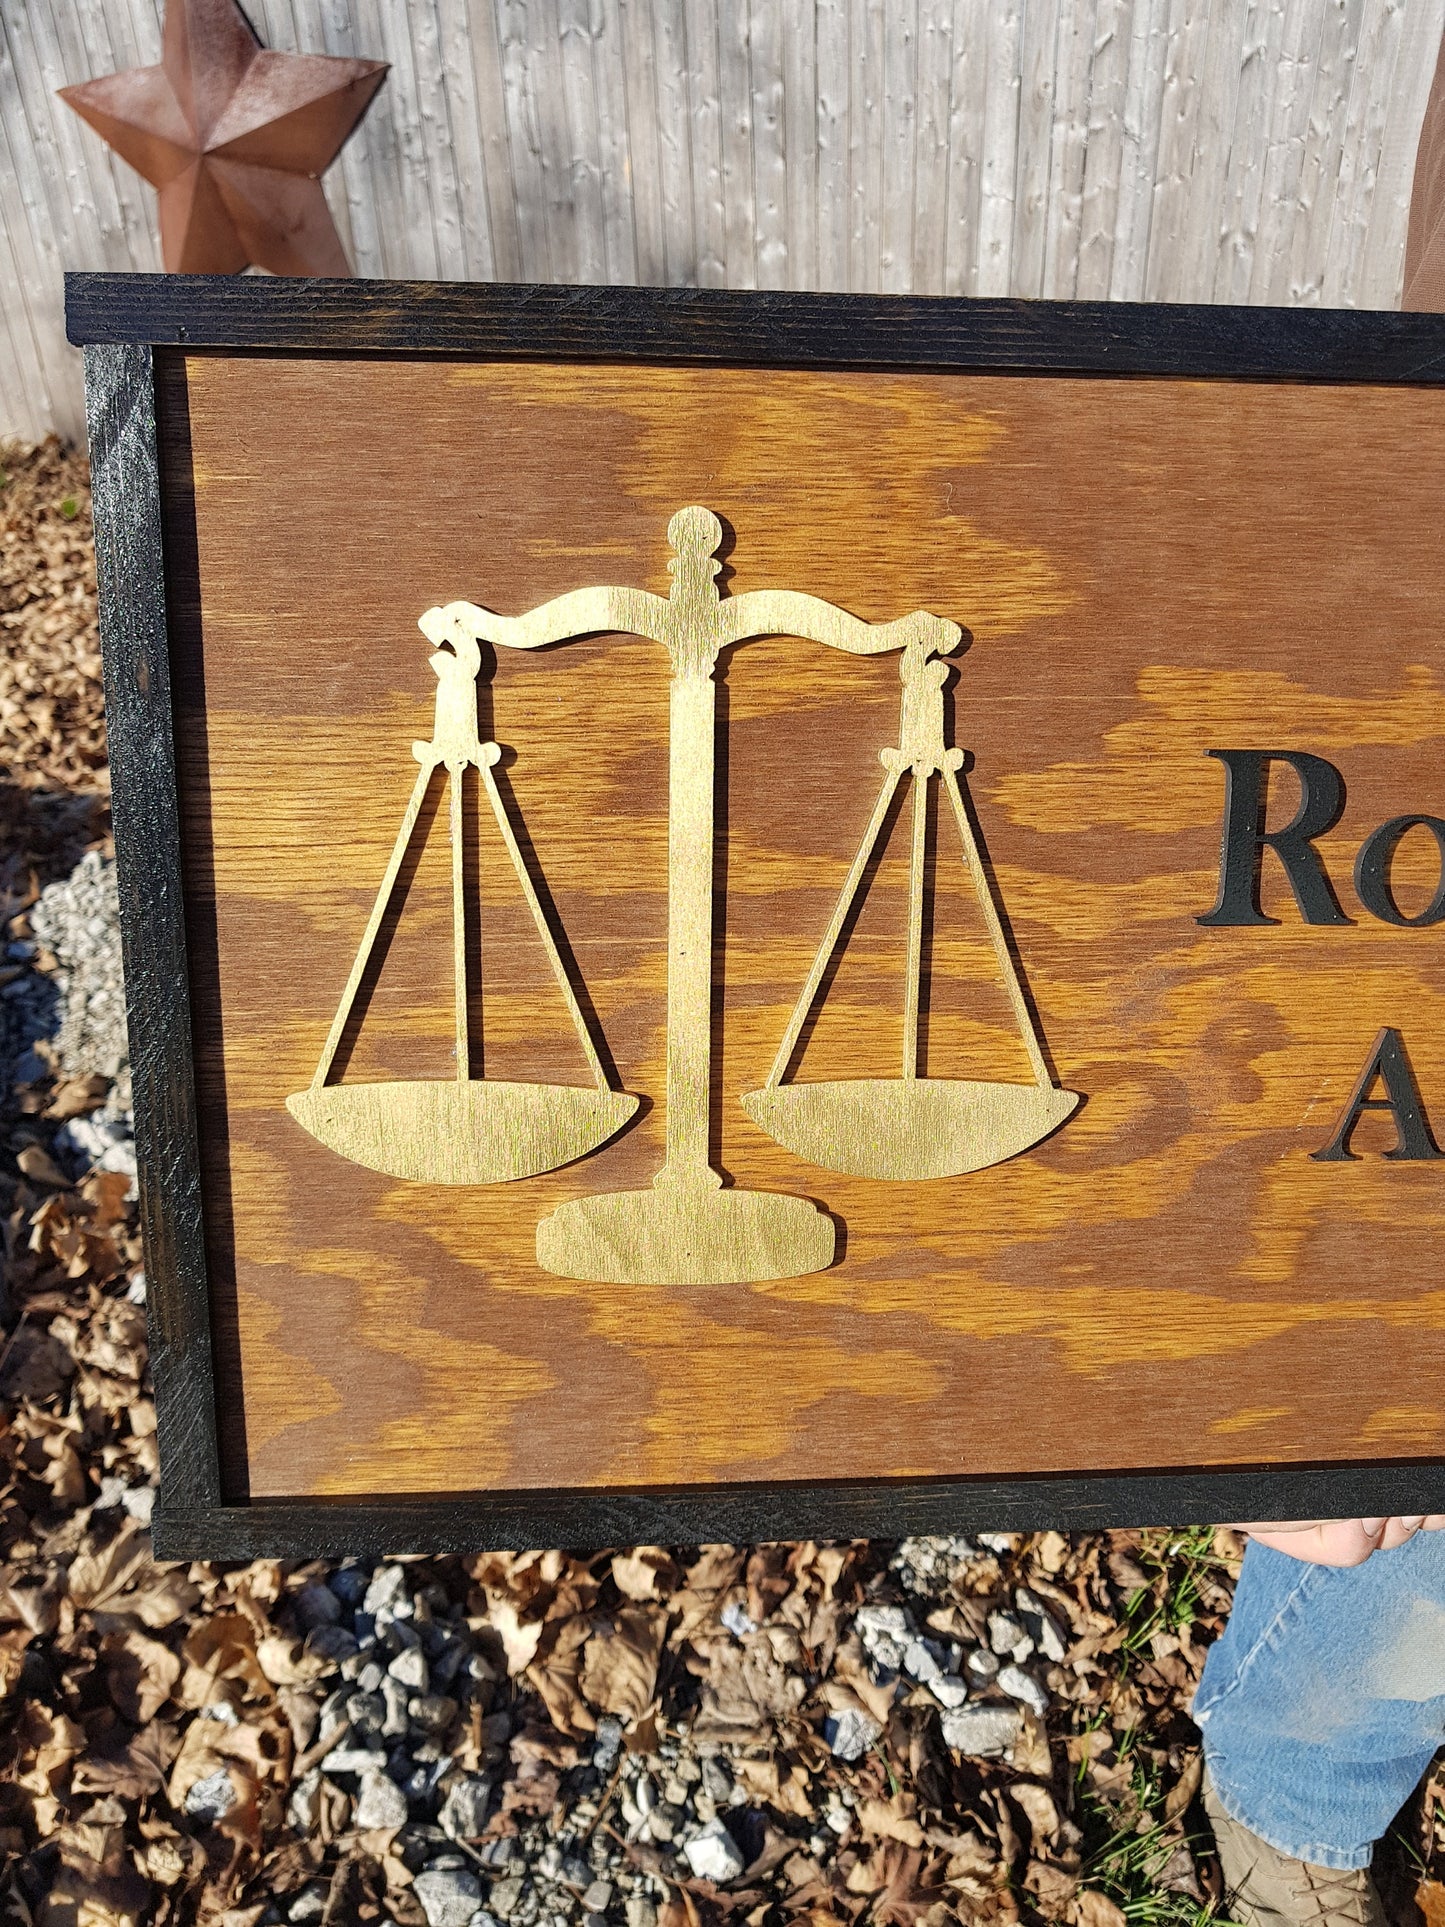 Large Custom Attorney Sign, Over-sized Rustic Business Logo, Wood, Laser Cut Out, 3D, Extra Large, Sign Footstepsinthepast